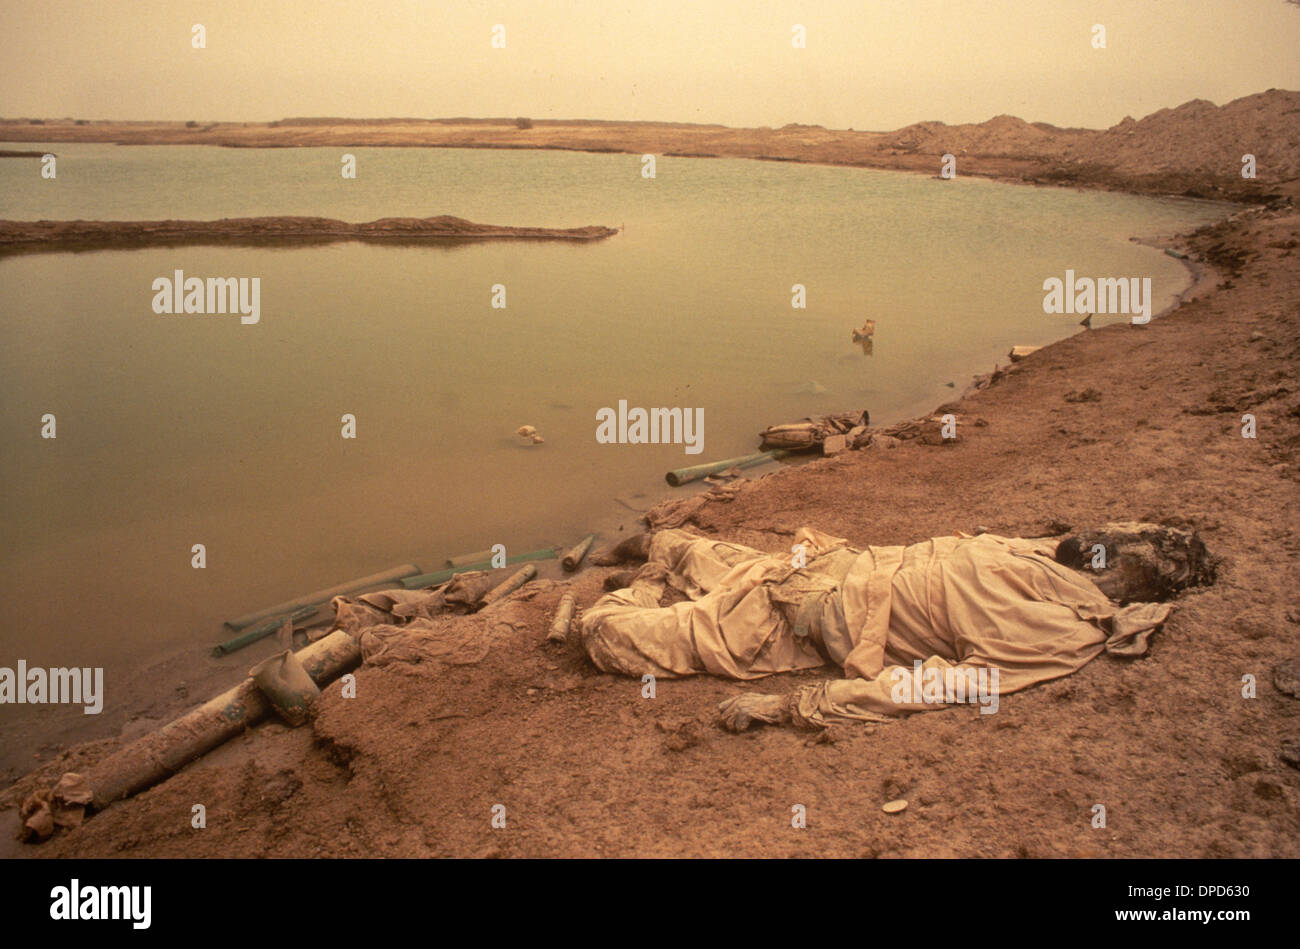 Iran Iraq war also known as First Persian Gulf War or Gulf War 1984.  A dead soldier the Mesopotamian marshes.  A sandstorm in the air. Near Basra, Southern Iraq. 1980s HOMER SYKES Stock Photo